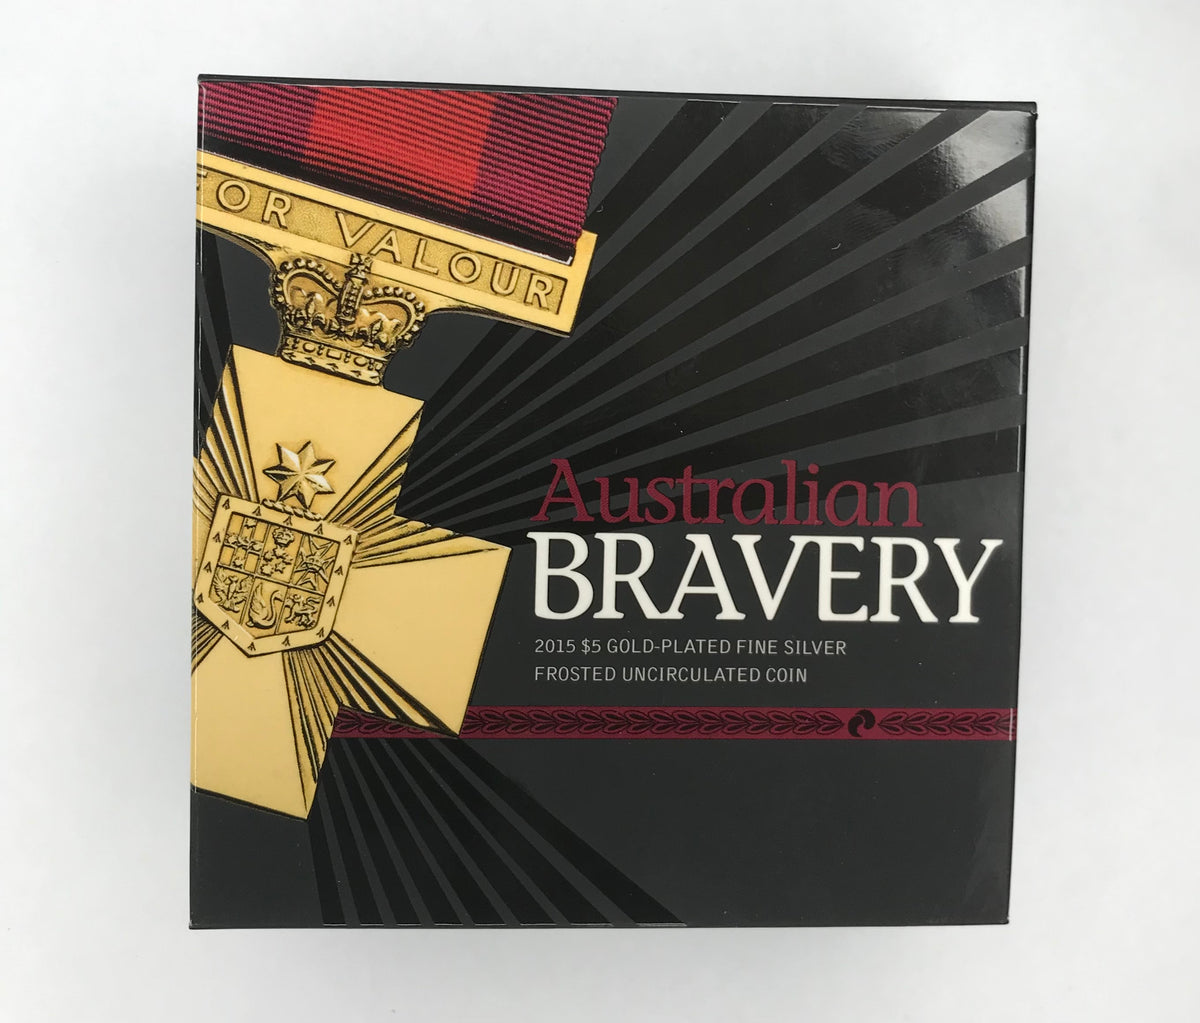 2015 $5 Australian Bravery. Gold-Plated Fine Silver Frosted Uncirculated Coin.